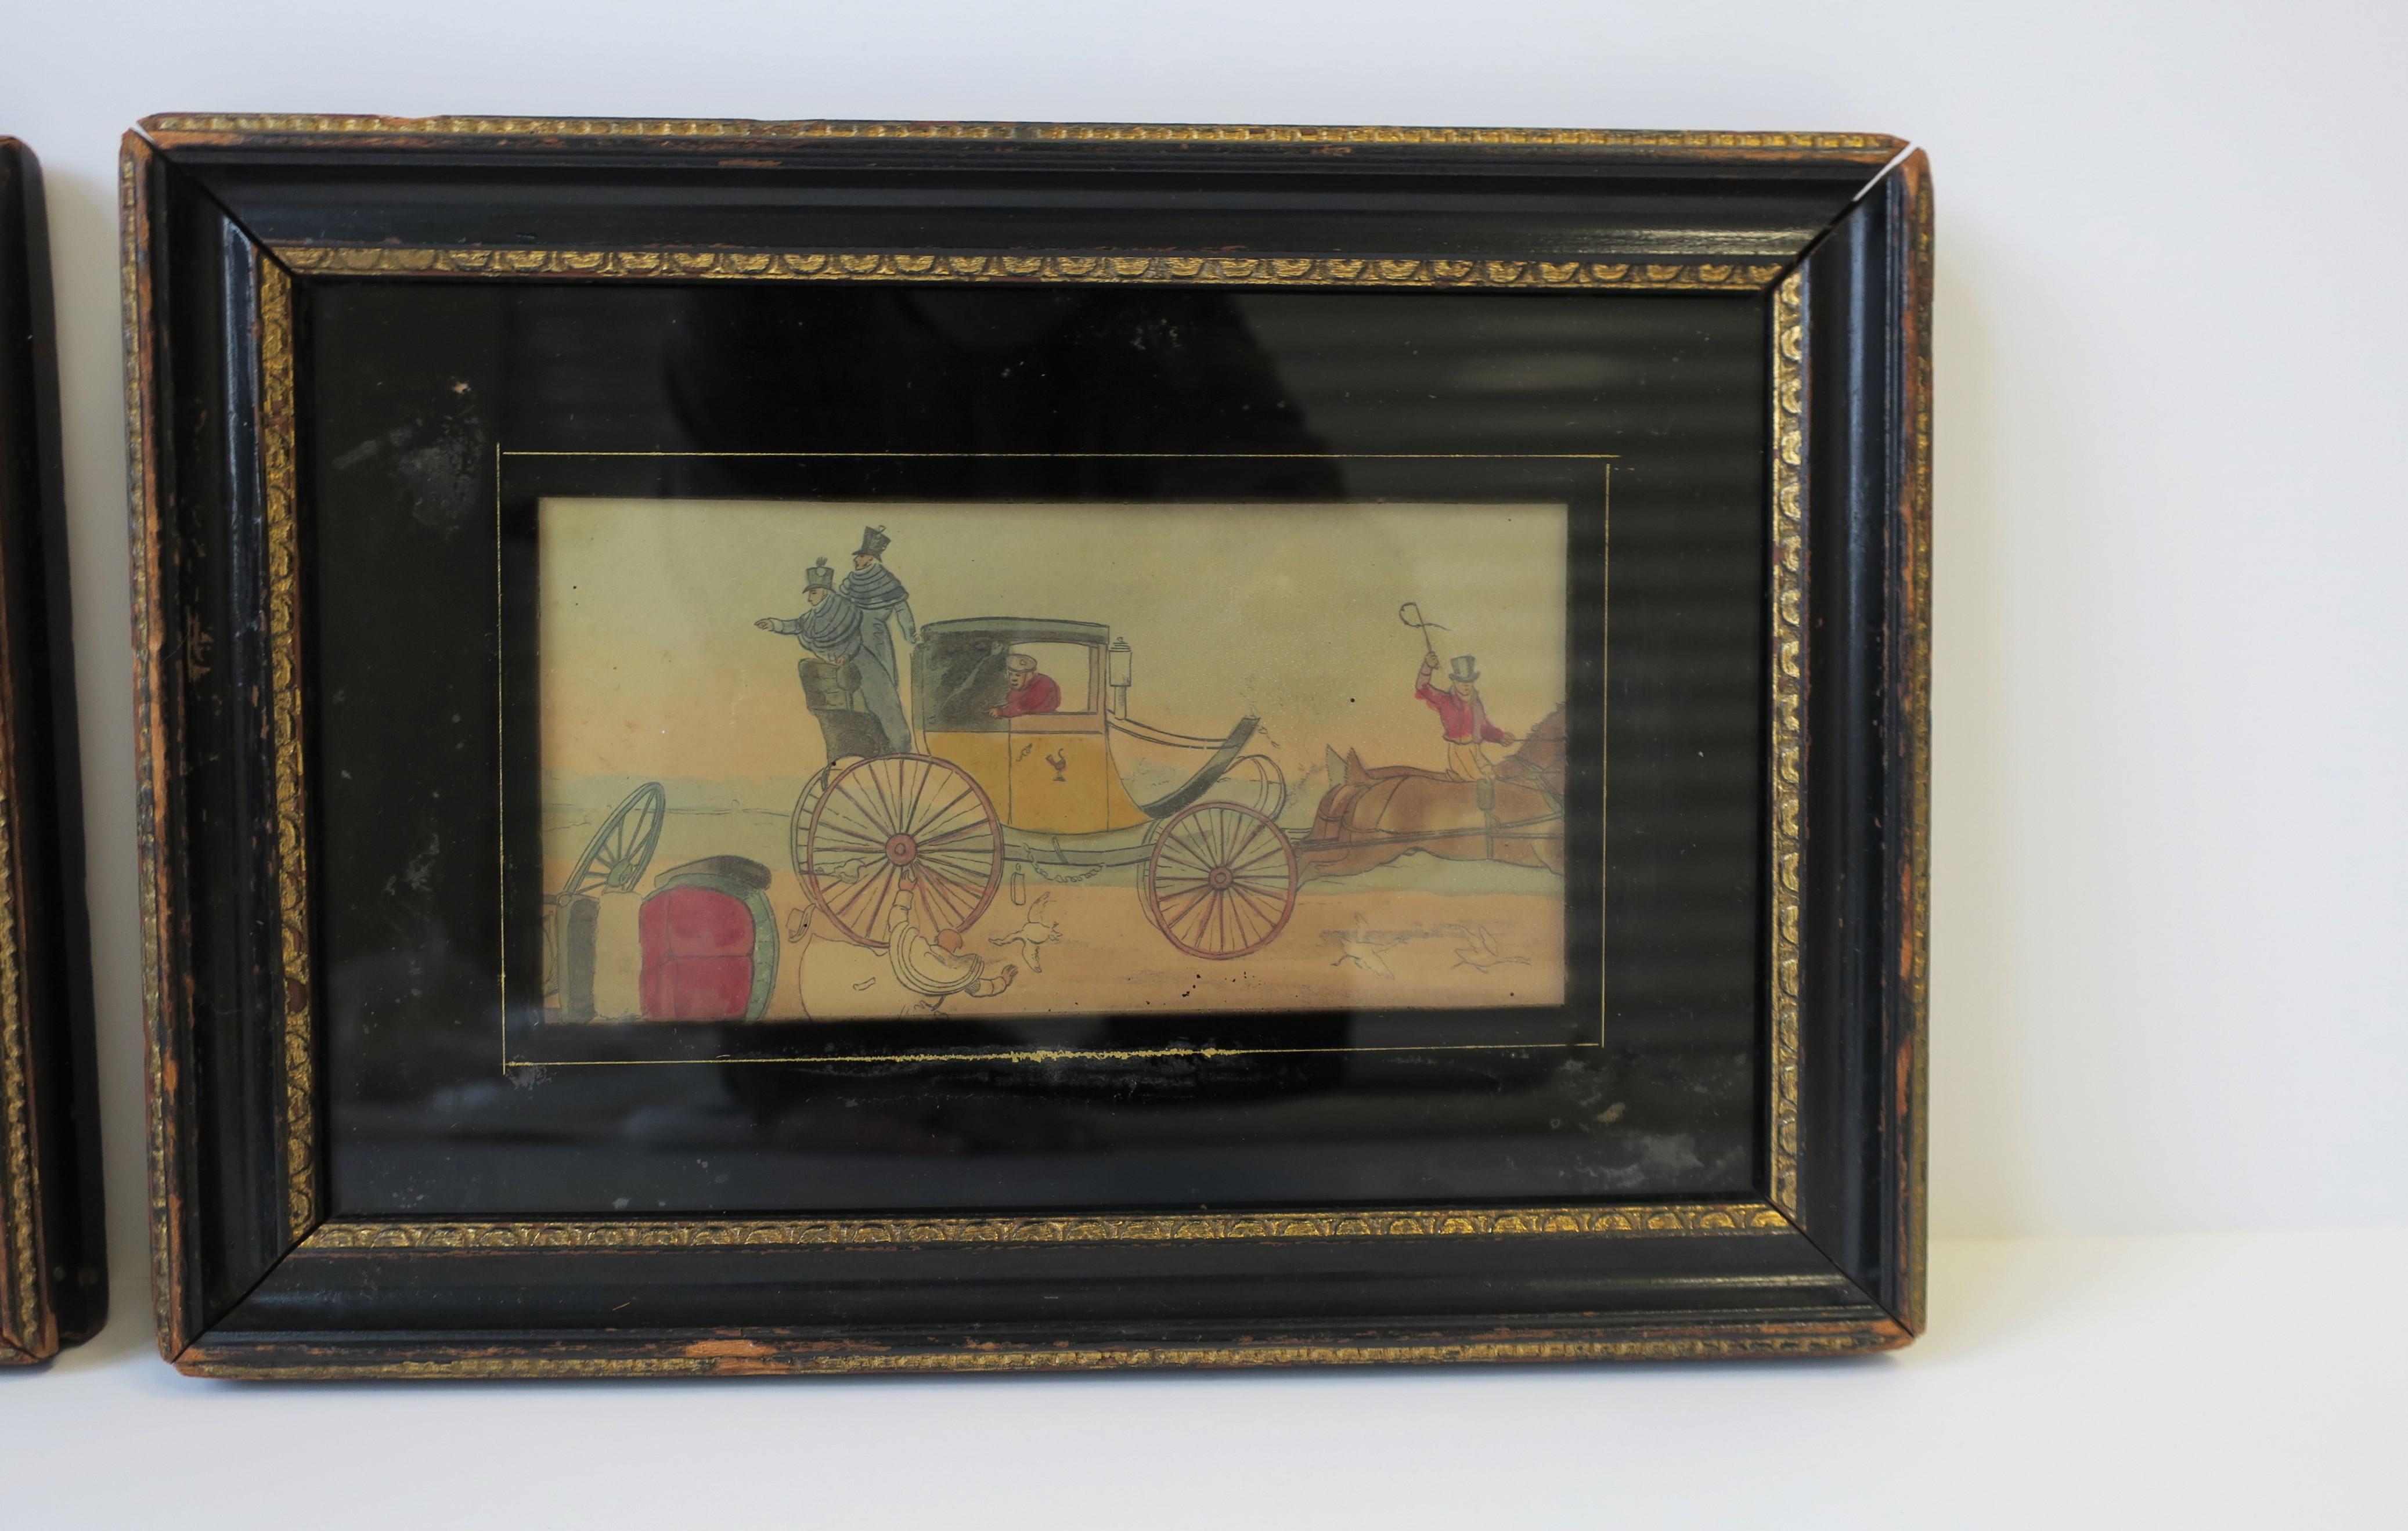 Lacquered Antique Black and Gold Frames with Artwork